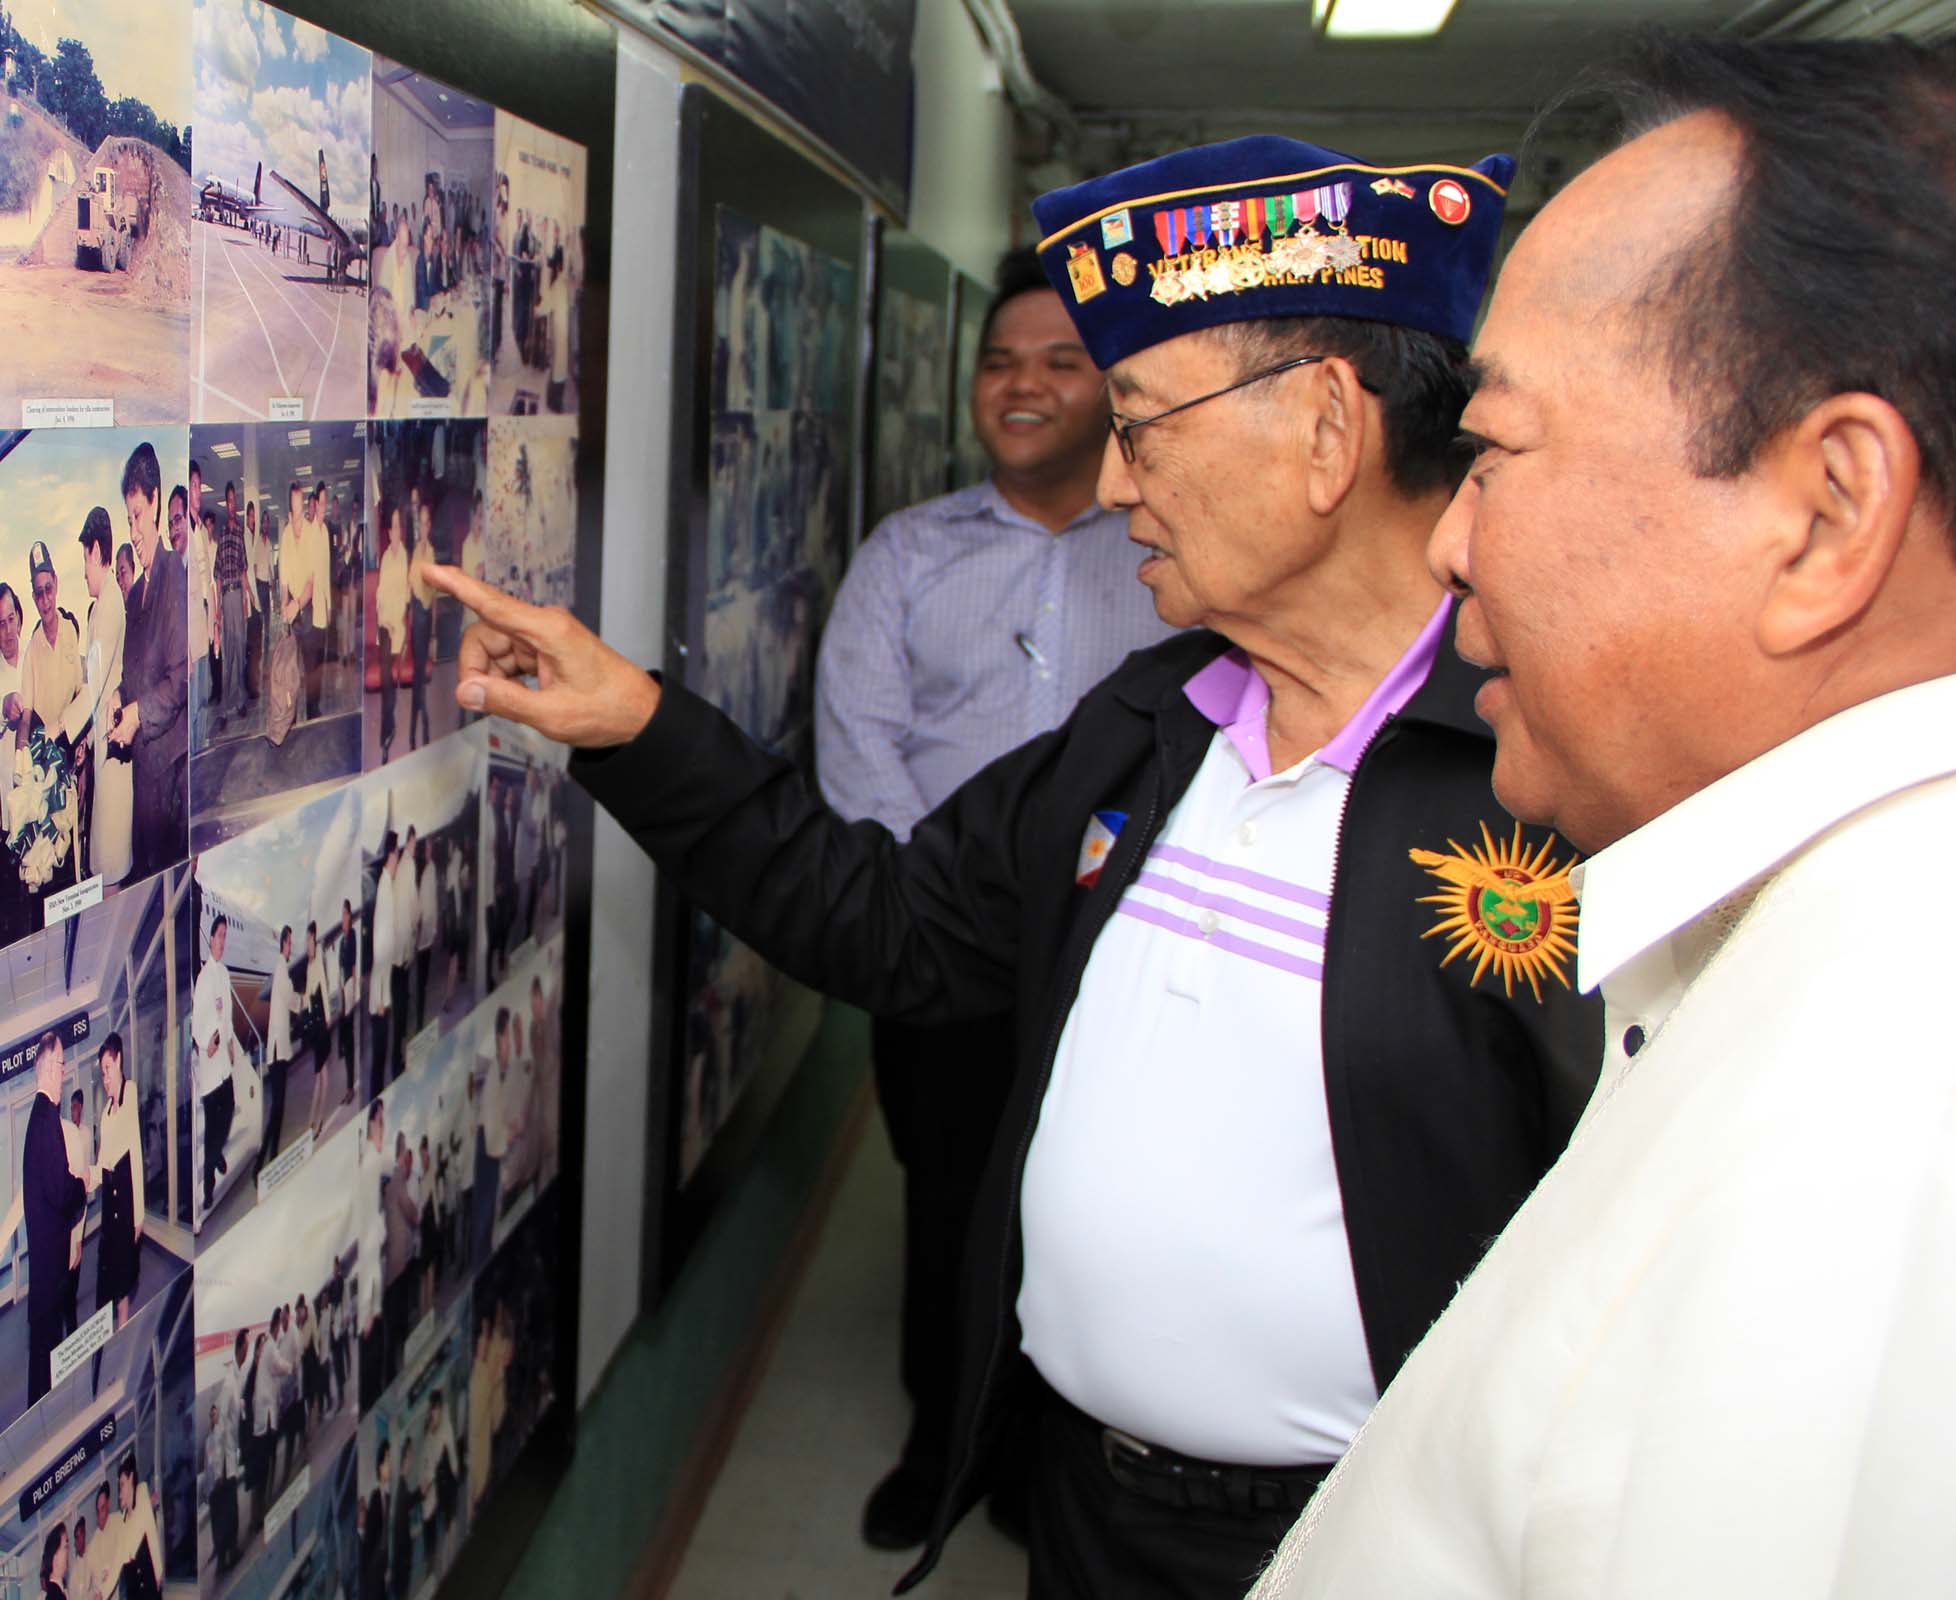 Former President Fidel V. Ramos views pictures on display at the SBMA office with SBMA Chairman Roberto V. Garcia during a visit to the Subic Bay Freeport recently.